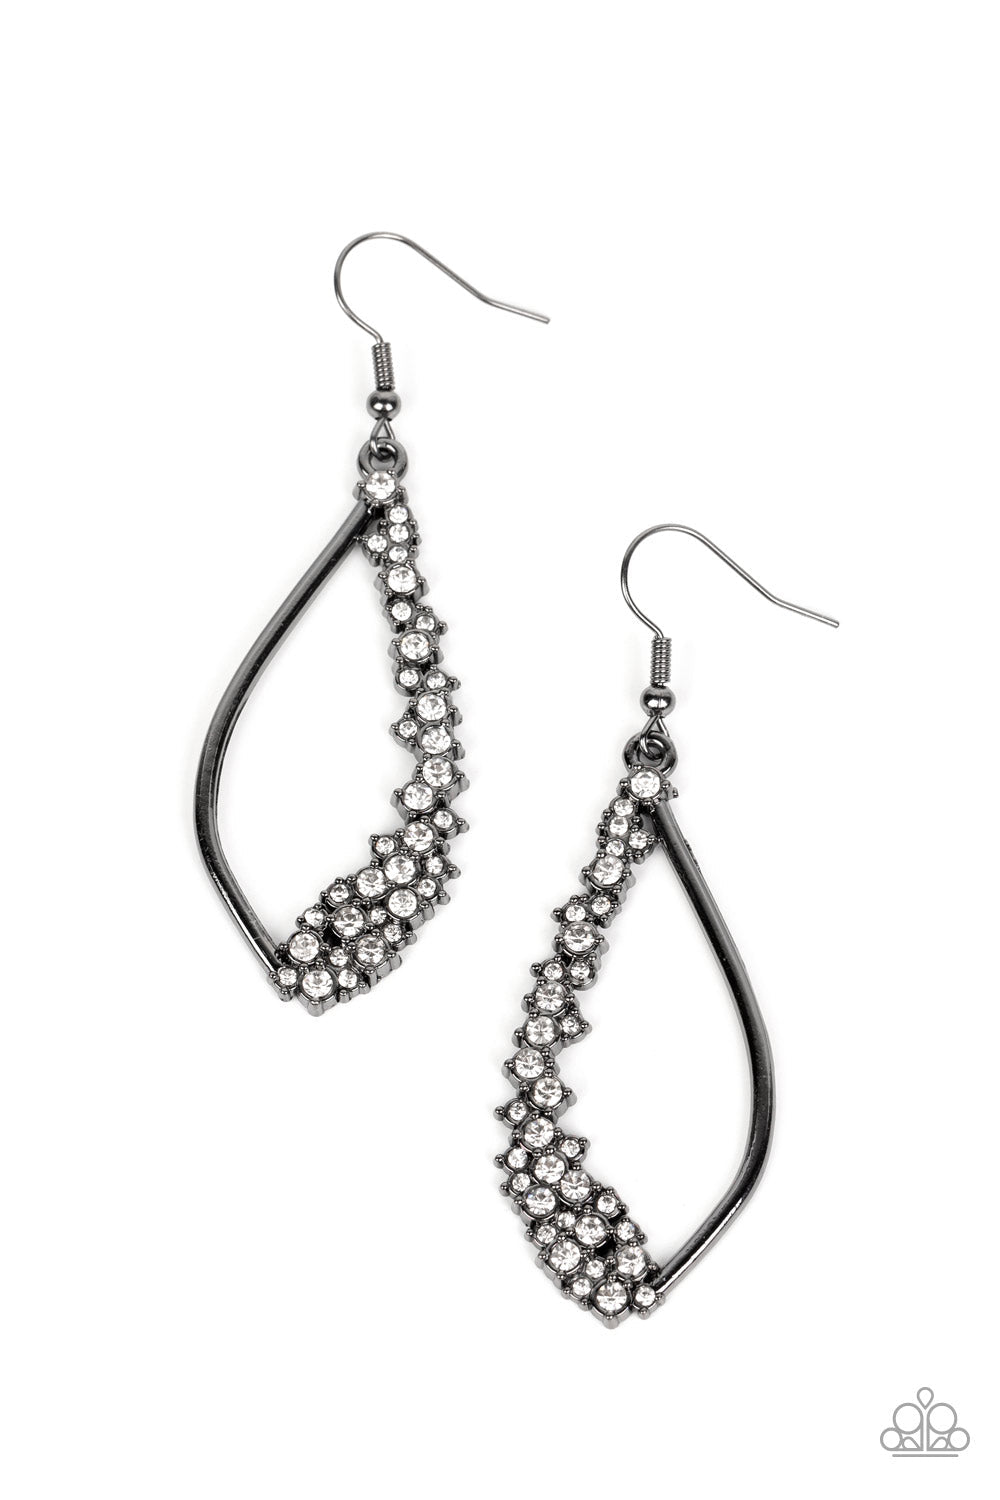 Sparkly Side Effects Gunmetal Black & White Rhinestone Earrings - Paparazzi Accessories- lightbox - CarasShop.com - $5 Jewelry by Cara Jewels